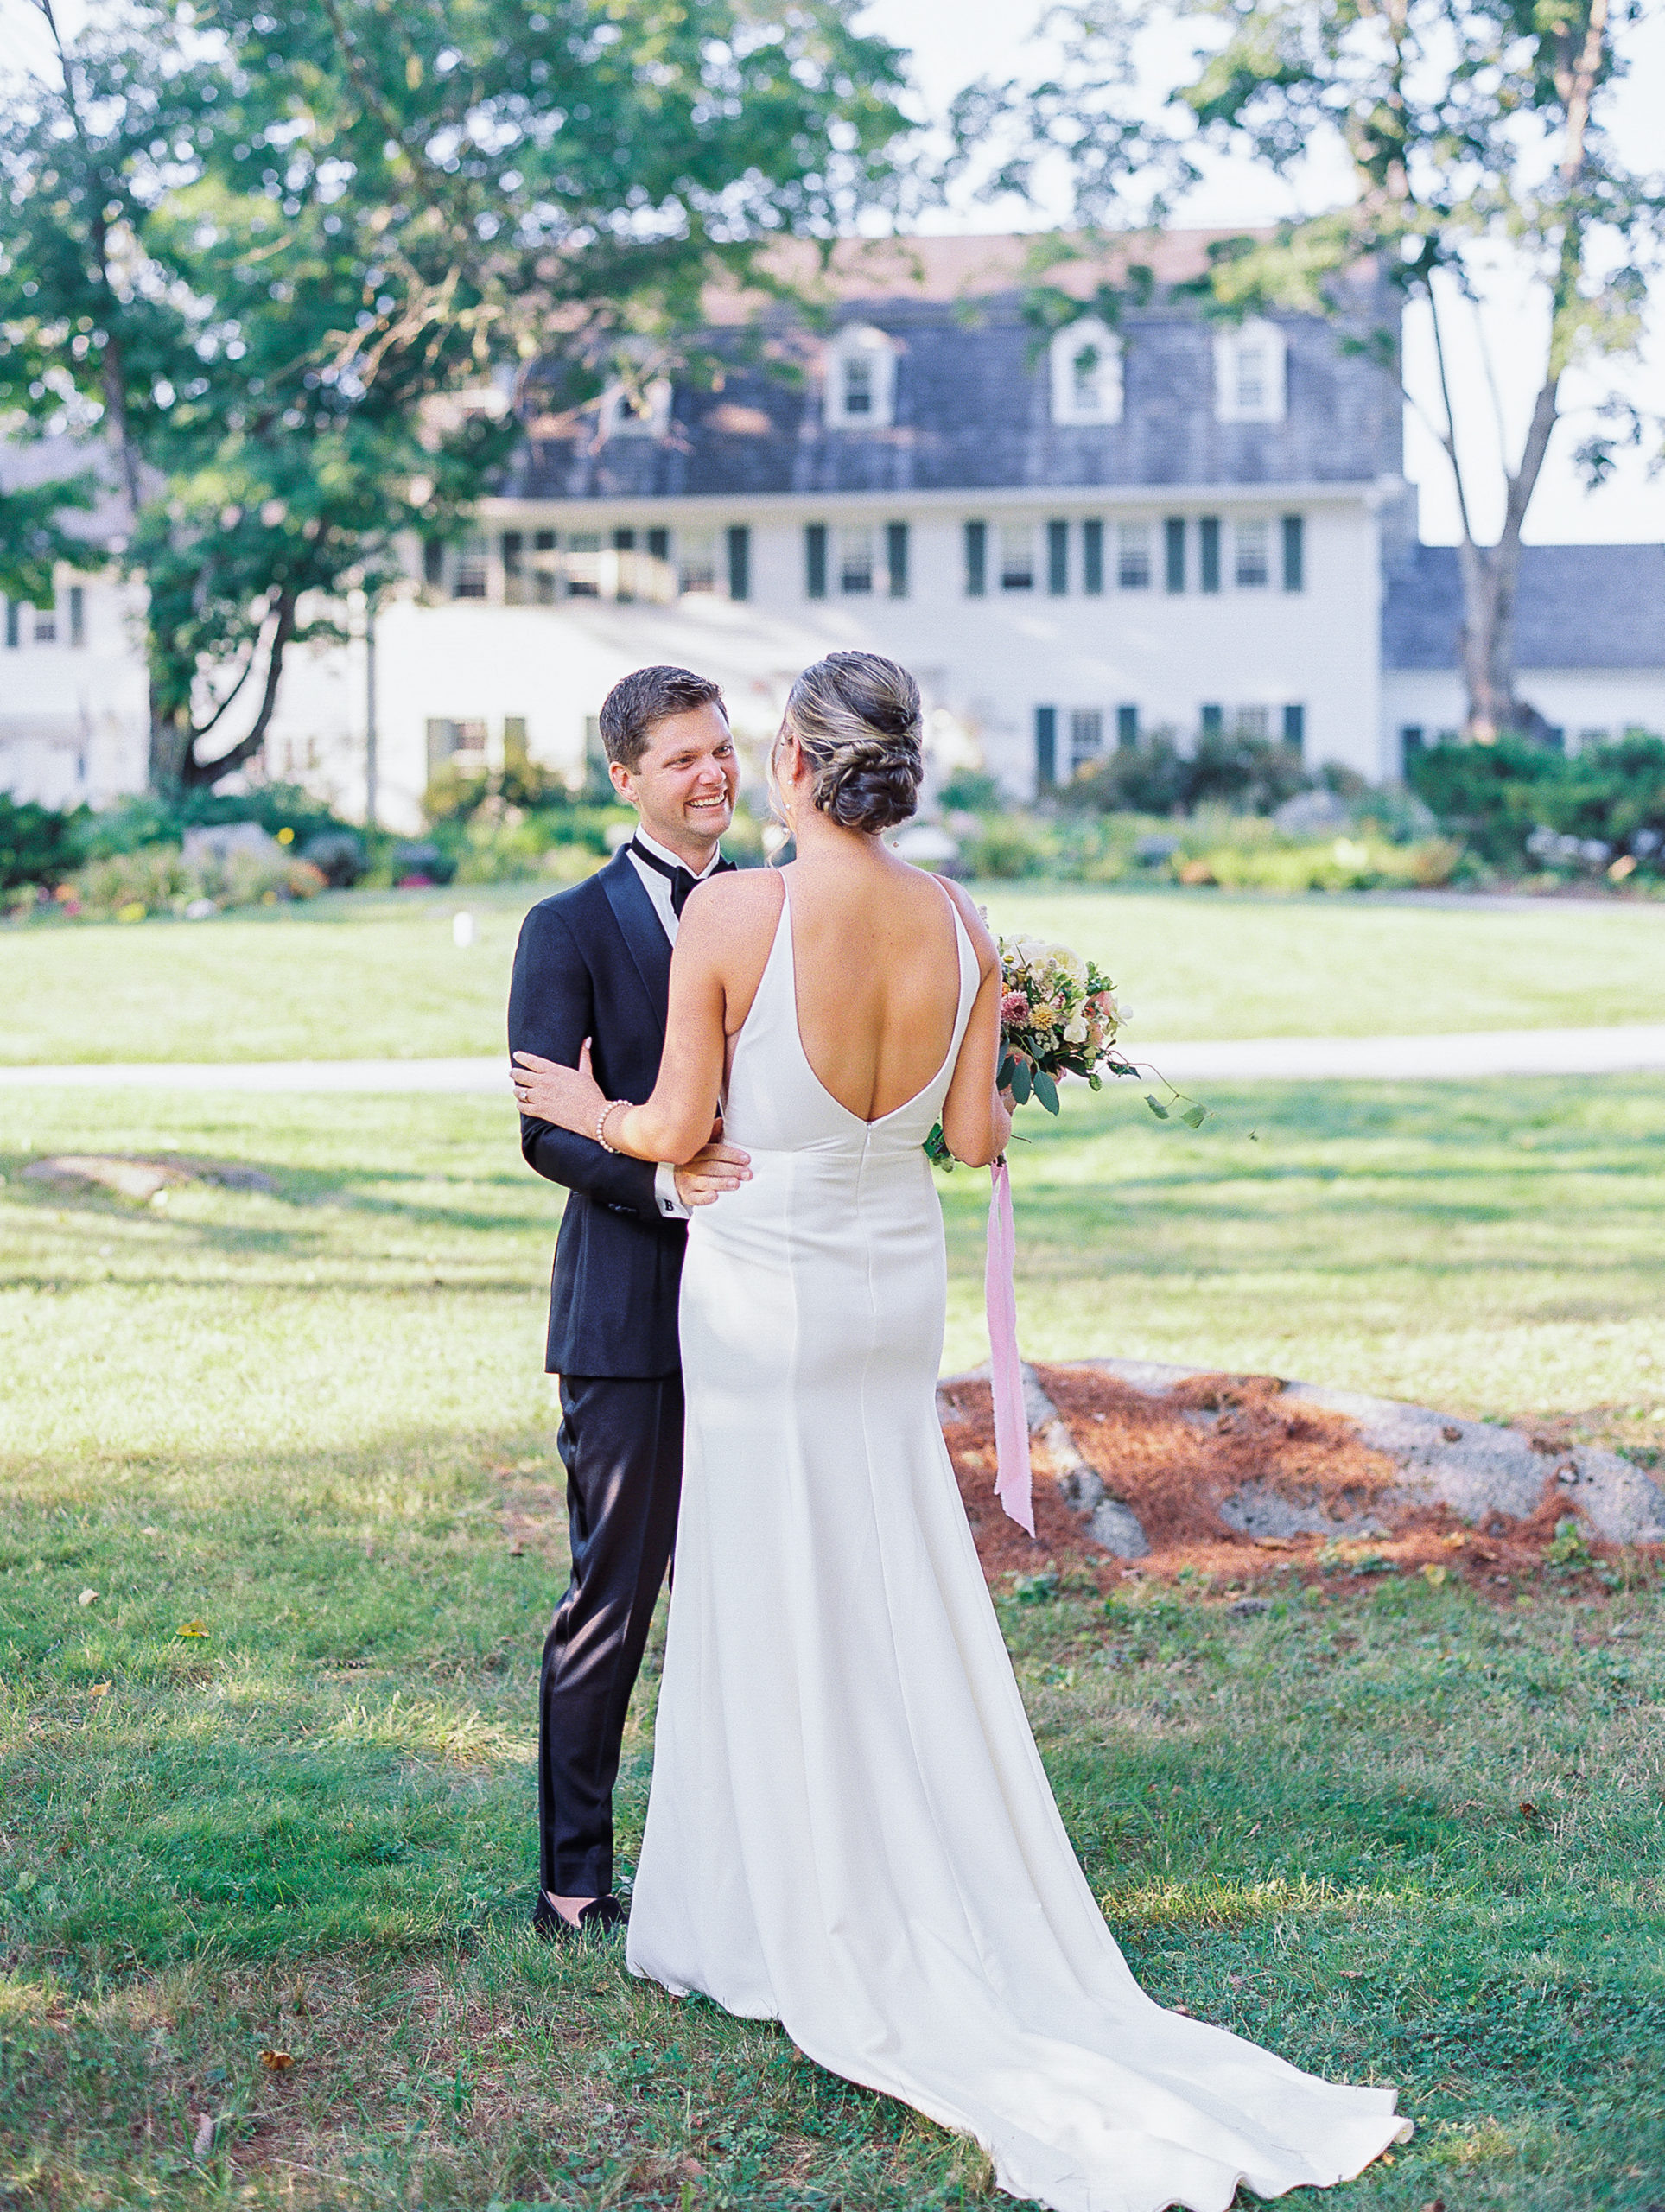 Bride and groom smile and embrace in front of white paneled house 